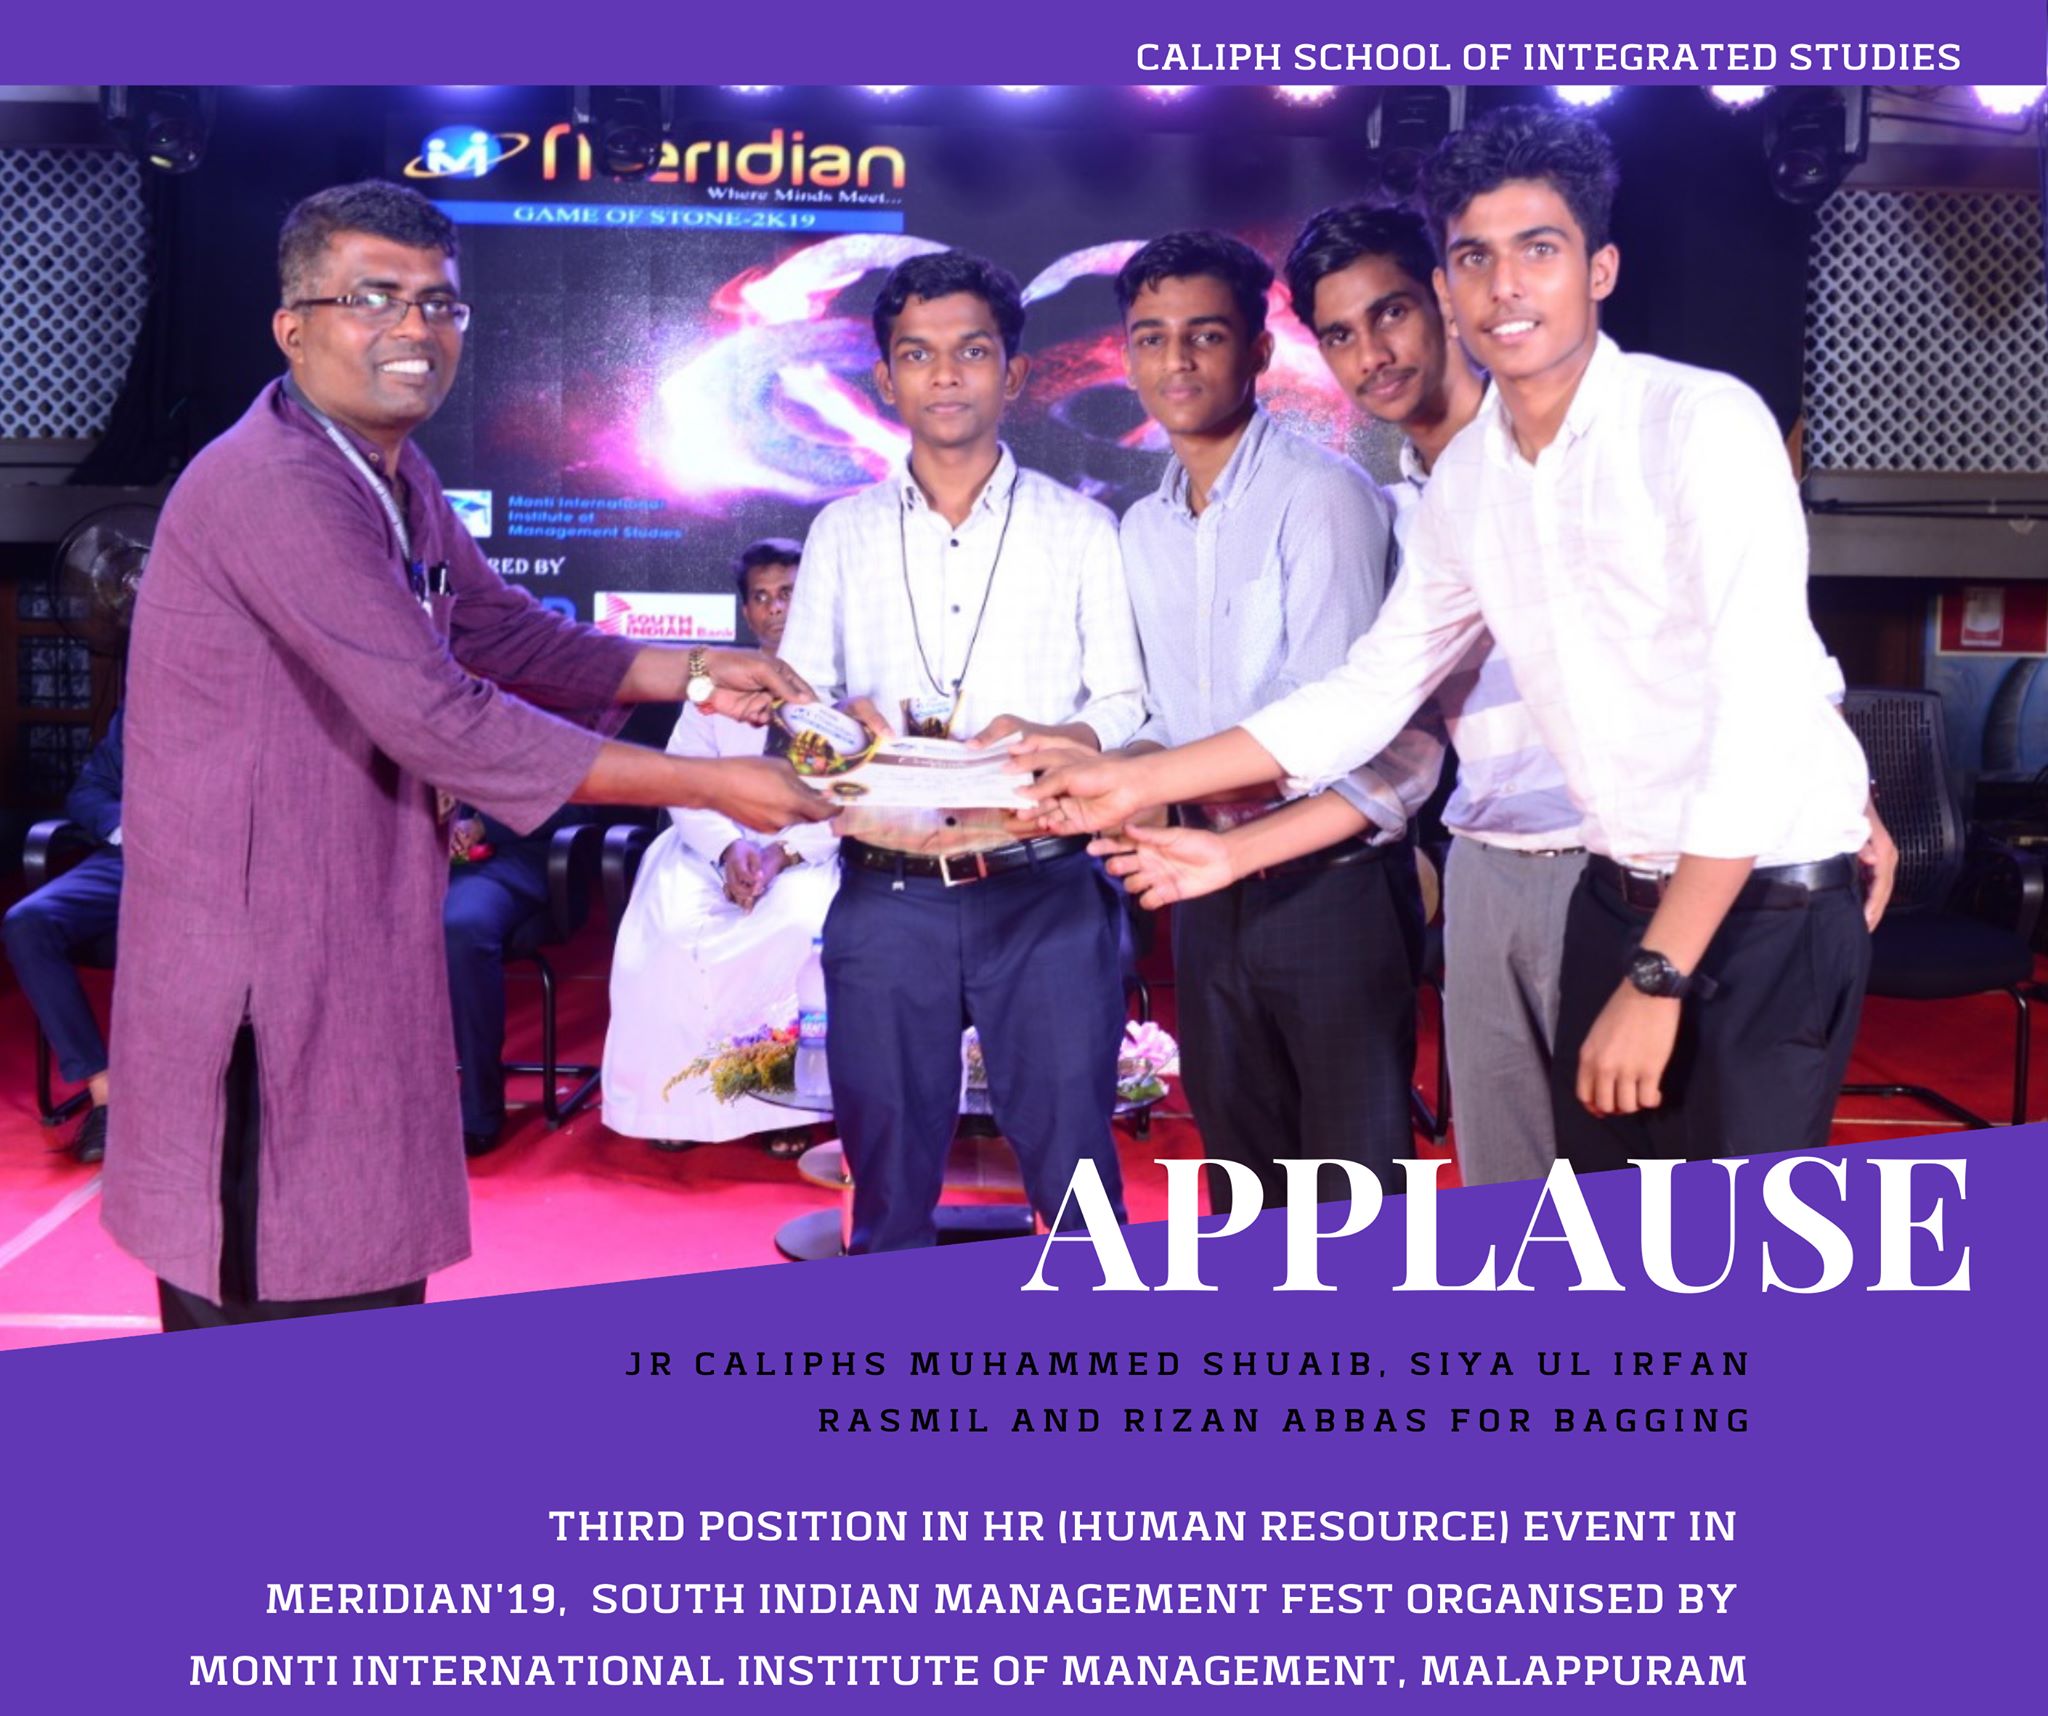 Second Runners Up: HR Event at Meridian '19 State level management fest organised by Monti institute of Management Studies, Malappuram